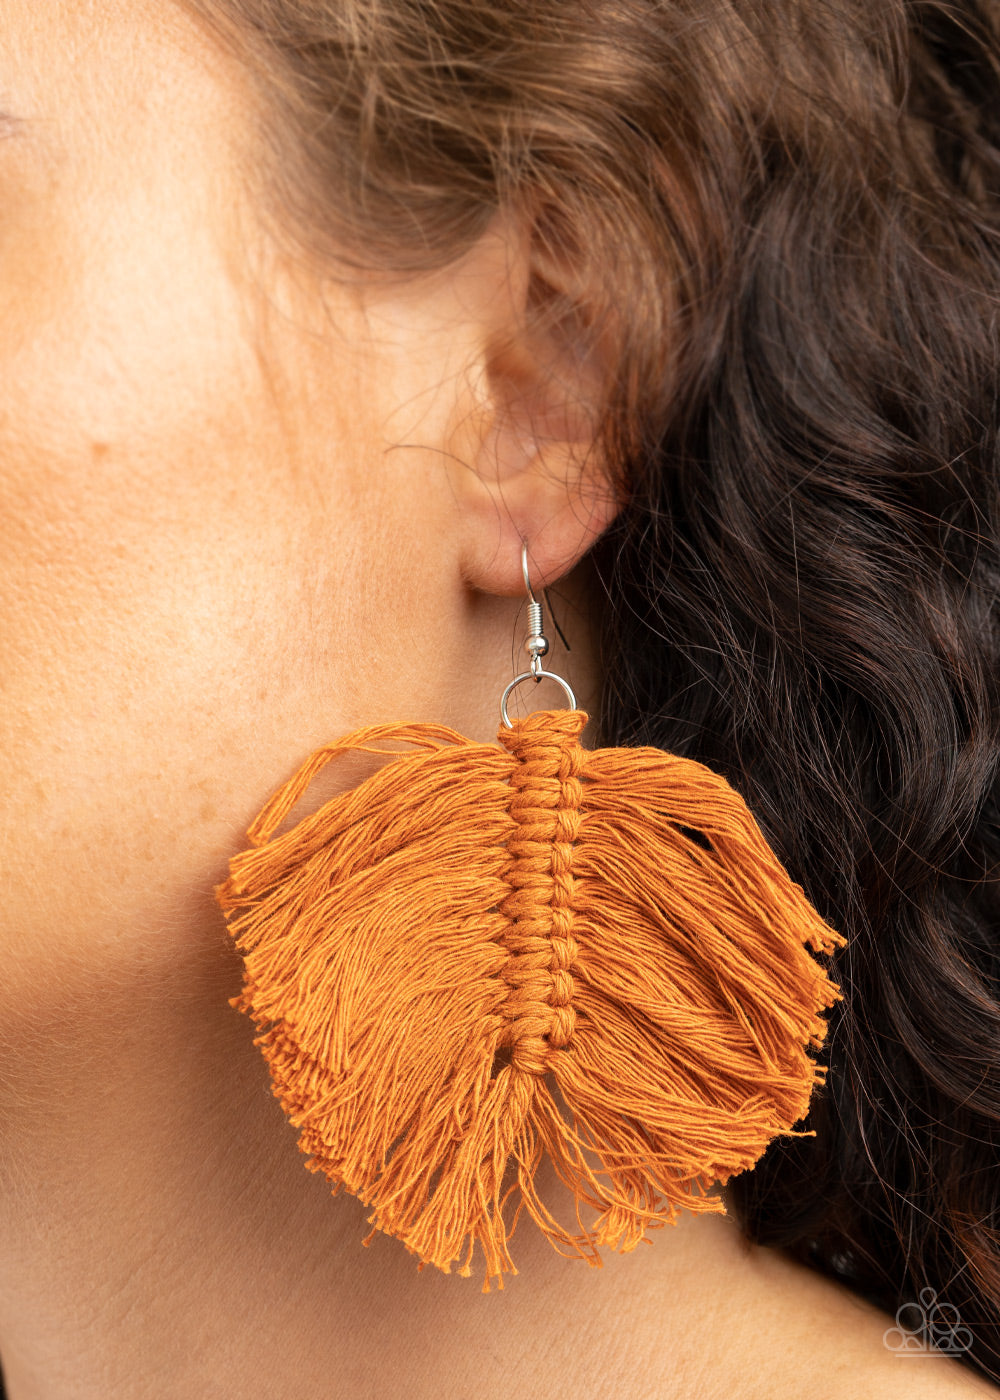 Rustic brown threaded tassels knot into a leaf-shaped frame, creating a colorful macramé inspired fringe. Earring attaches to a standard fishhook fitting.  Sold as one pair of earrings.